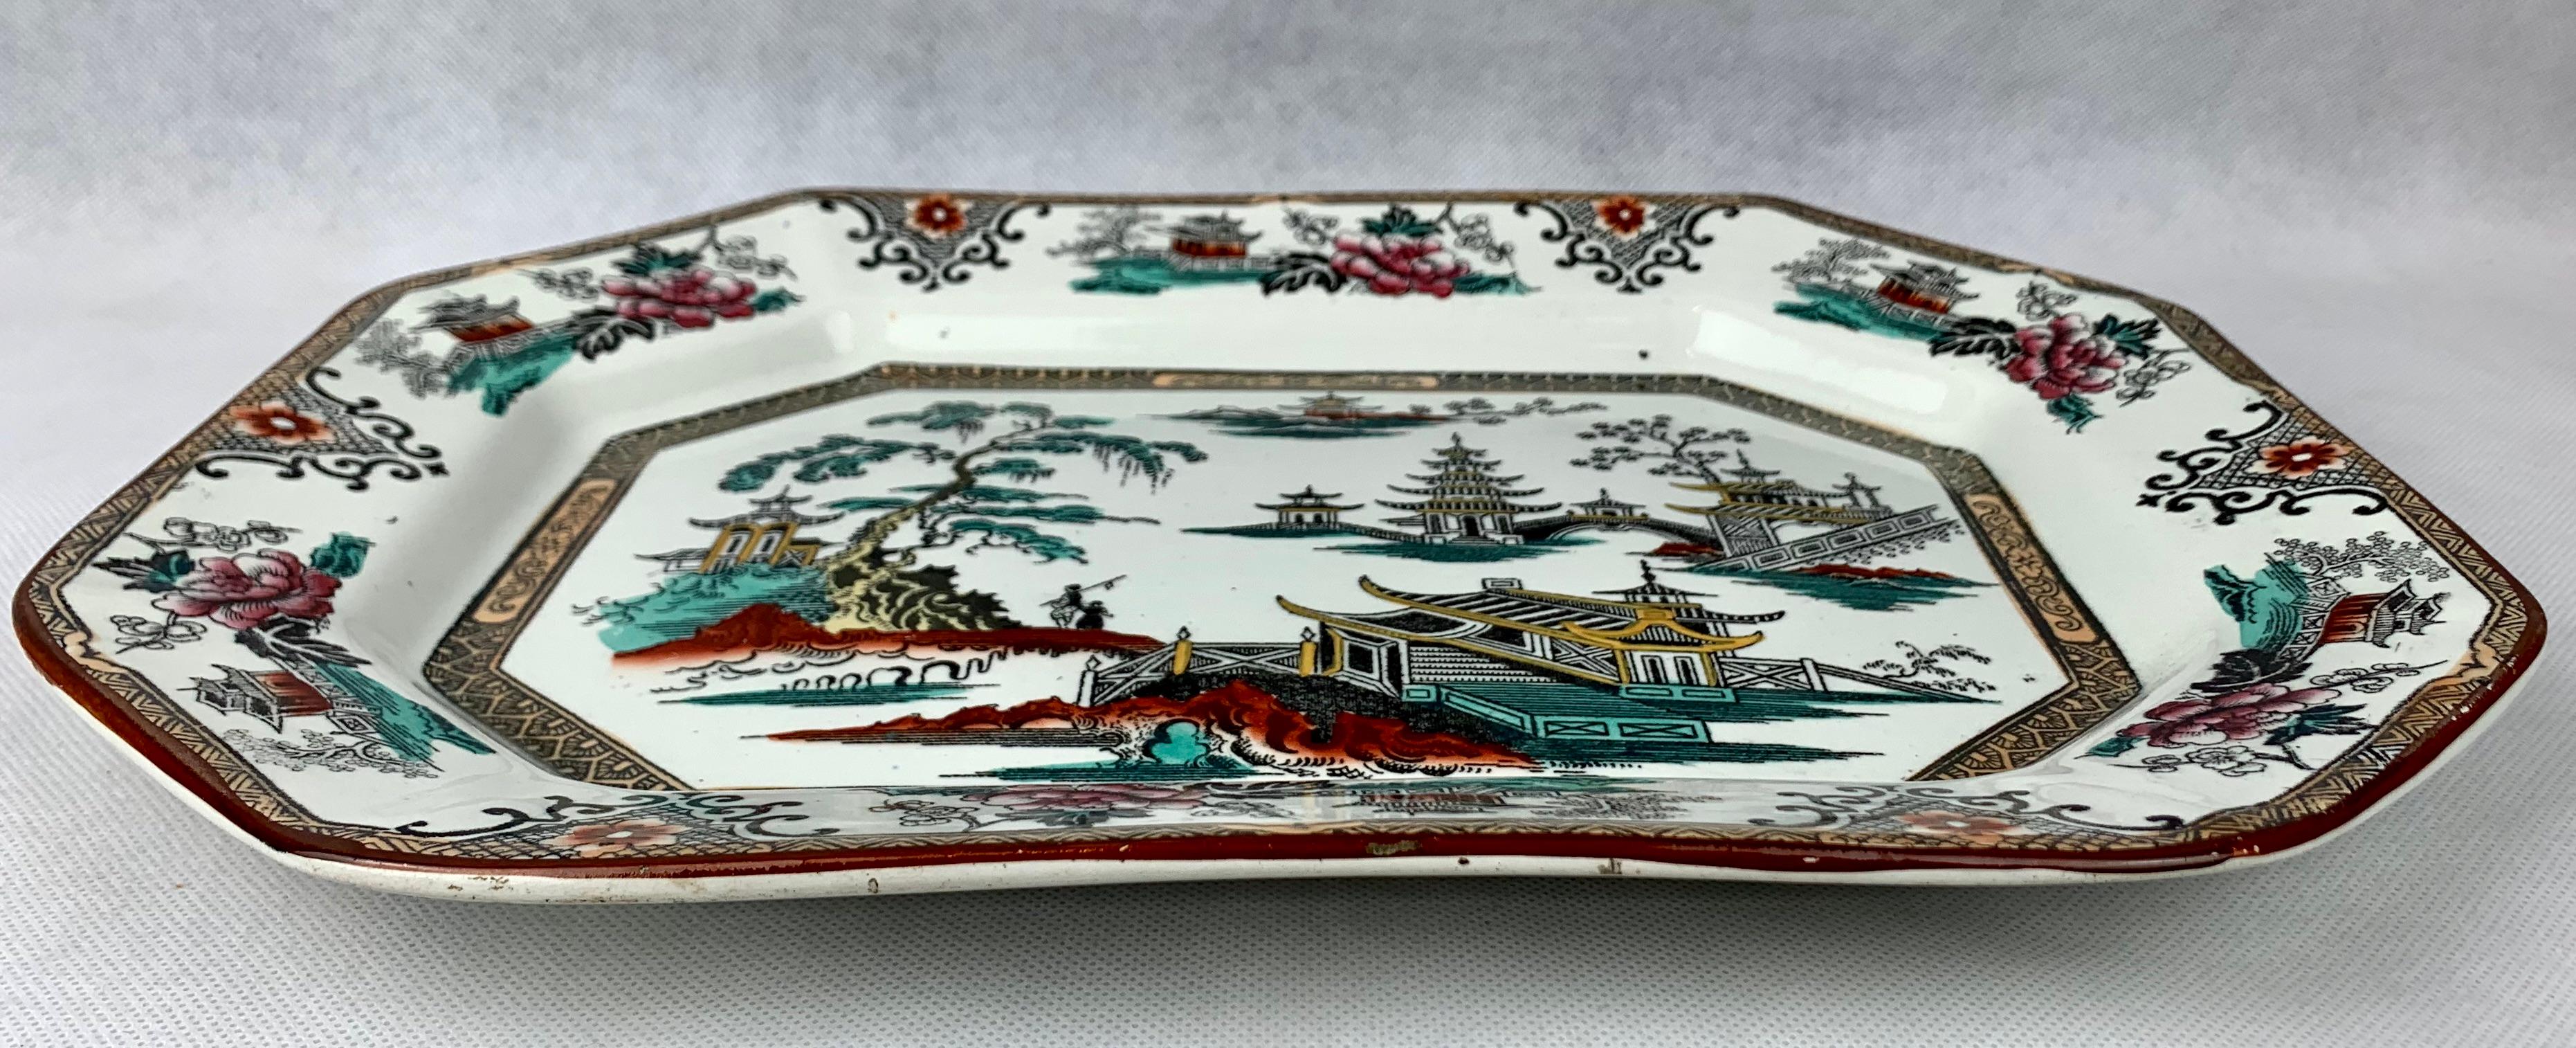 English Victorian cut corner ironstone platter with charming chinoiserie scenes. Transfer printed in black and then overpainted with color. The over painting was done with turquoise, rosy reds and iron red, while the border was over painted with